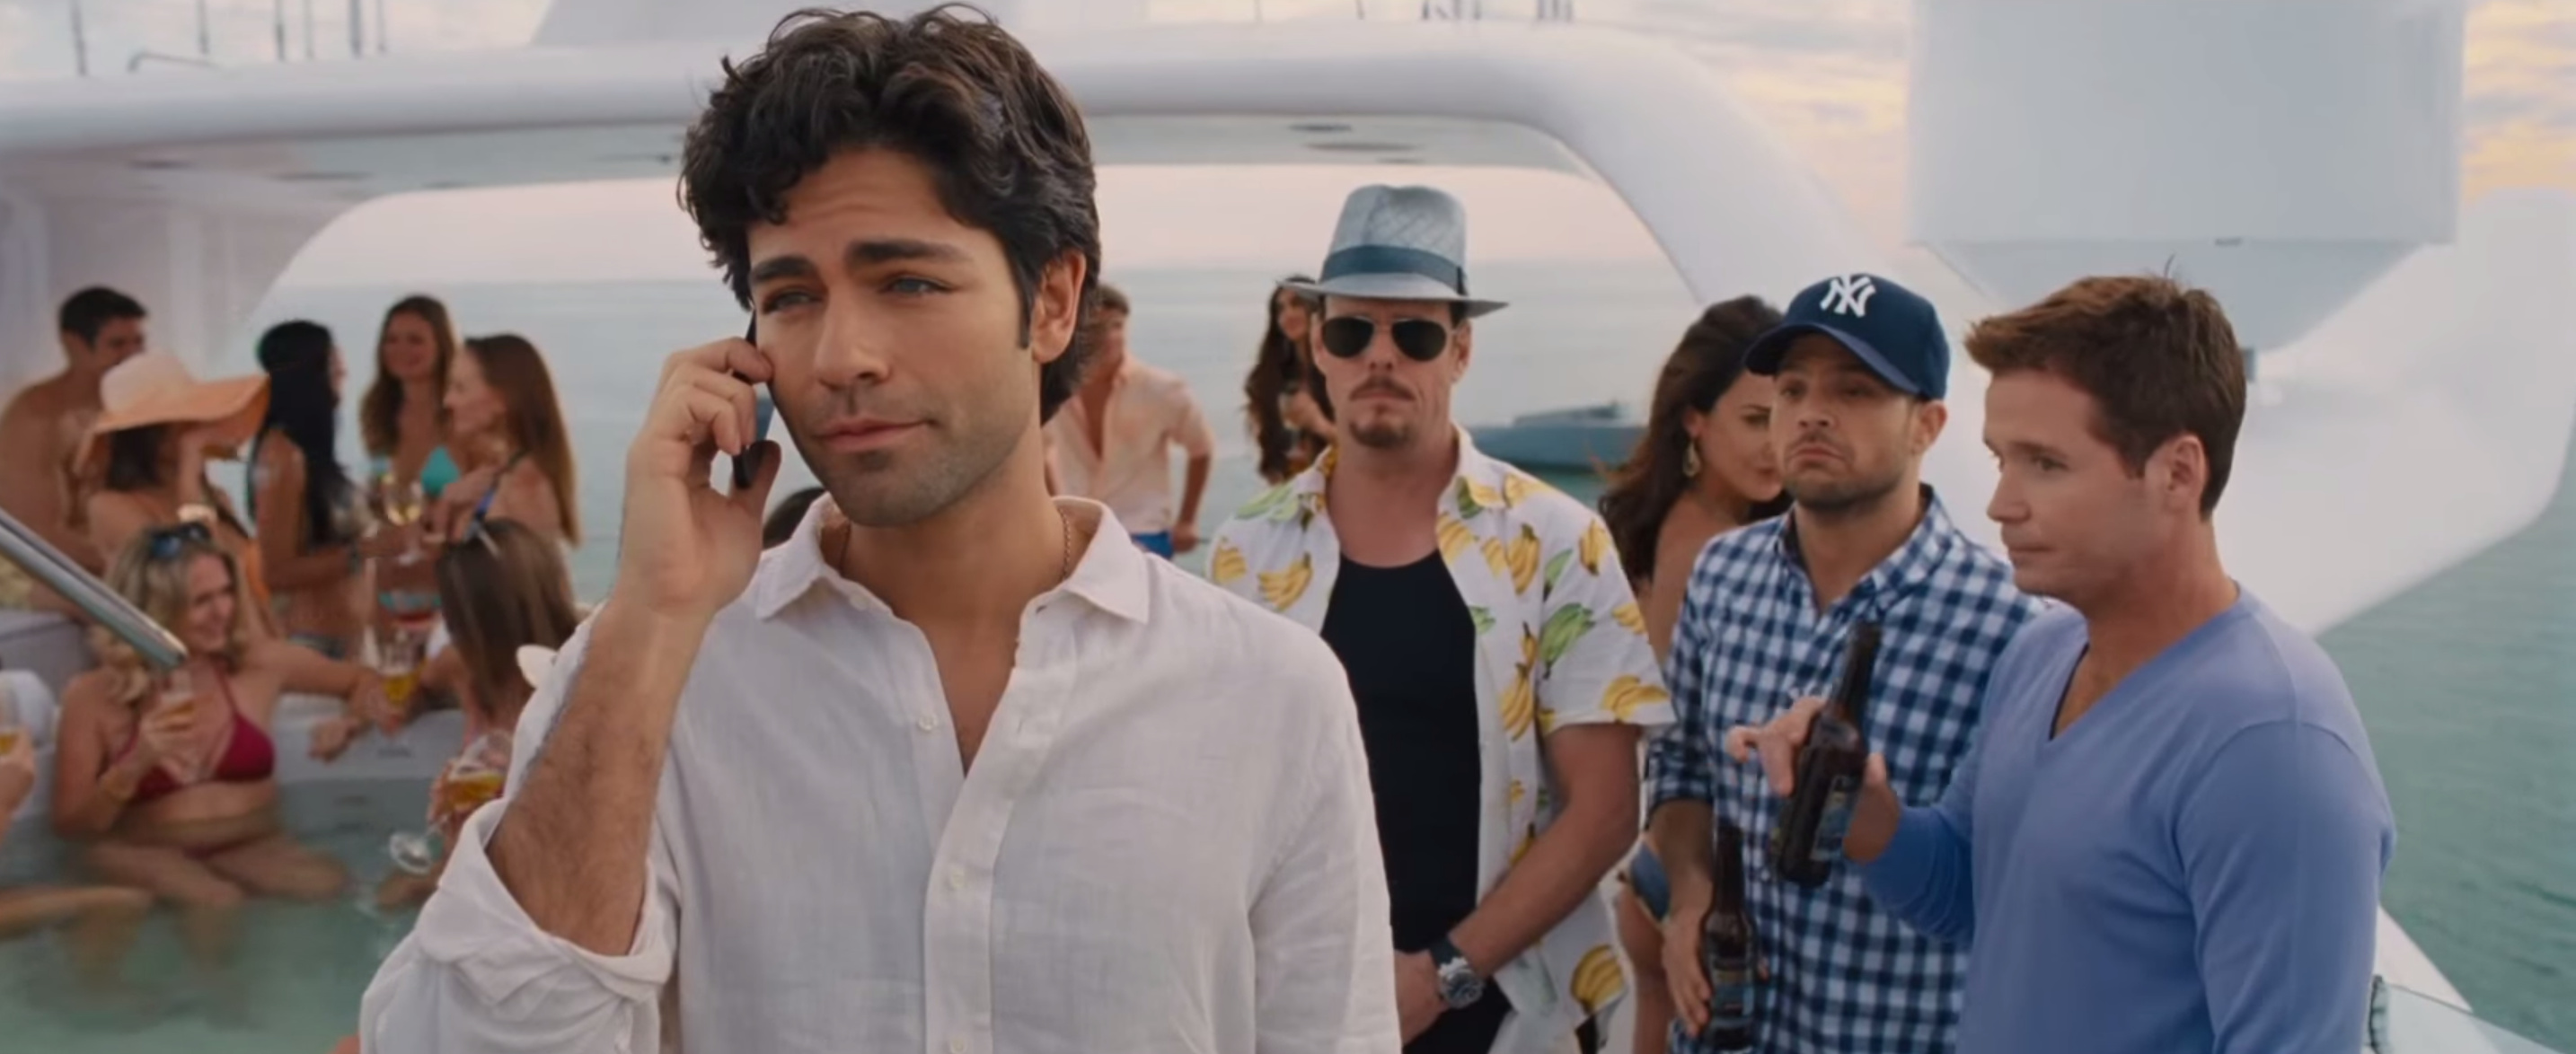 Entourage (TV Series): Adrian Grenier as Vincent Chase, Jerry Ferrara as Turtle, Created and written by Doug Ellin. 2870x1180 Dual Screen Wallpaper.